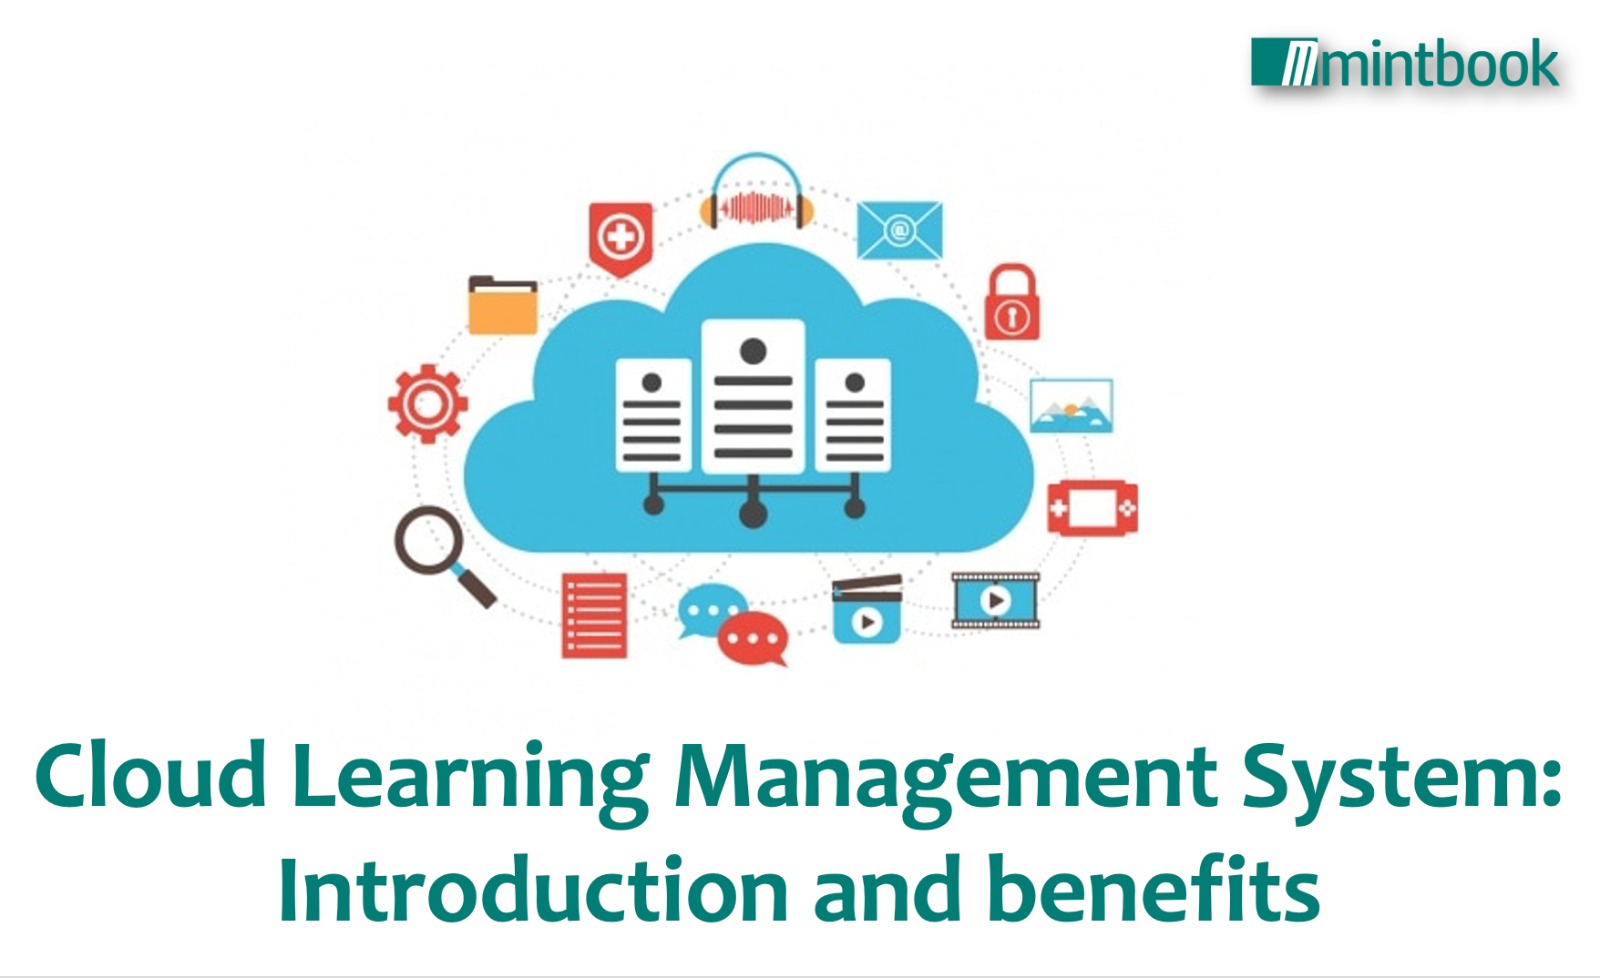 Cloud Learning Management System Introduction and Benefits